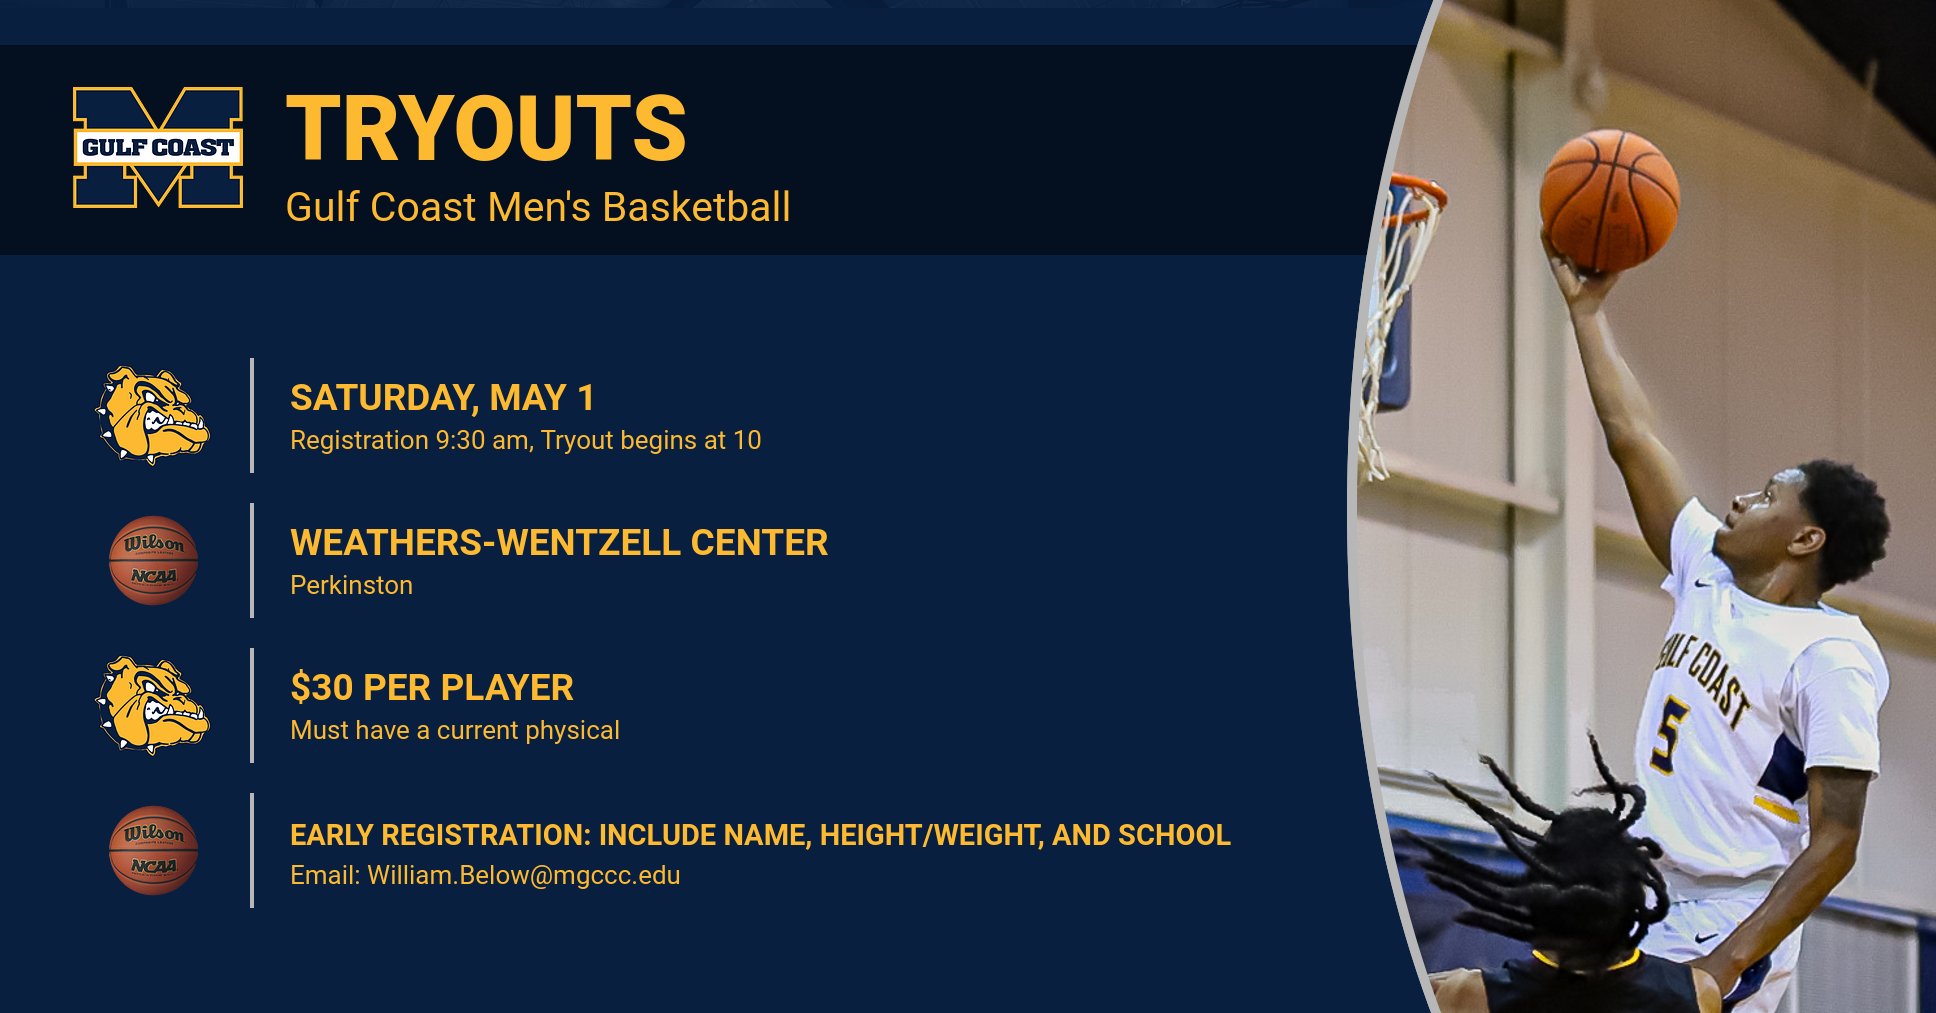 Men’s Basketball tryout scheduled Saturday